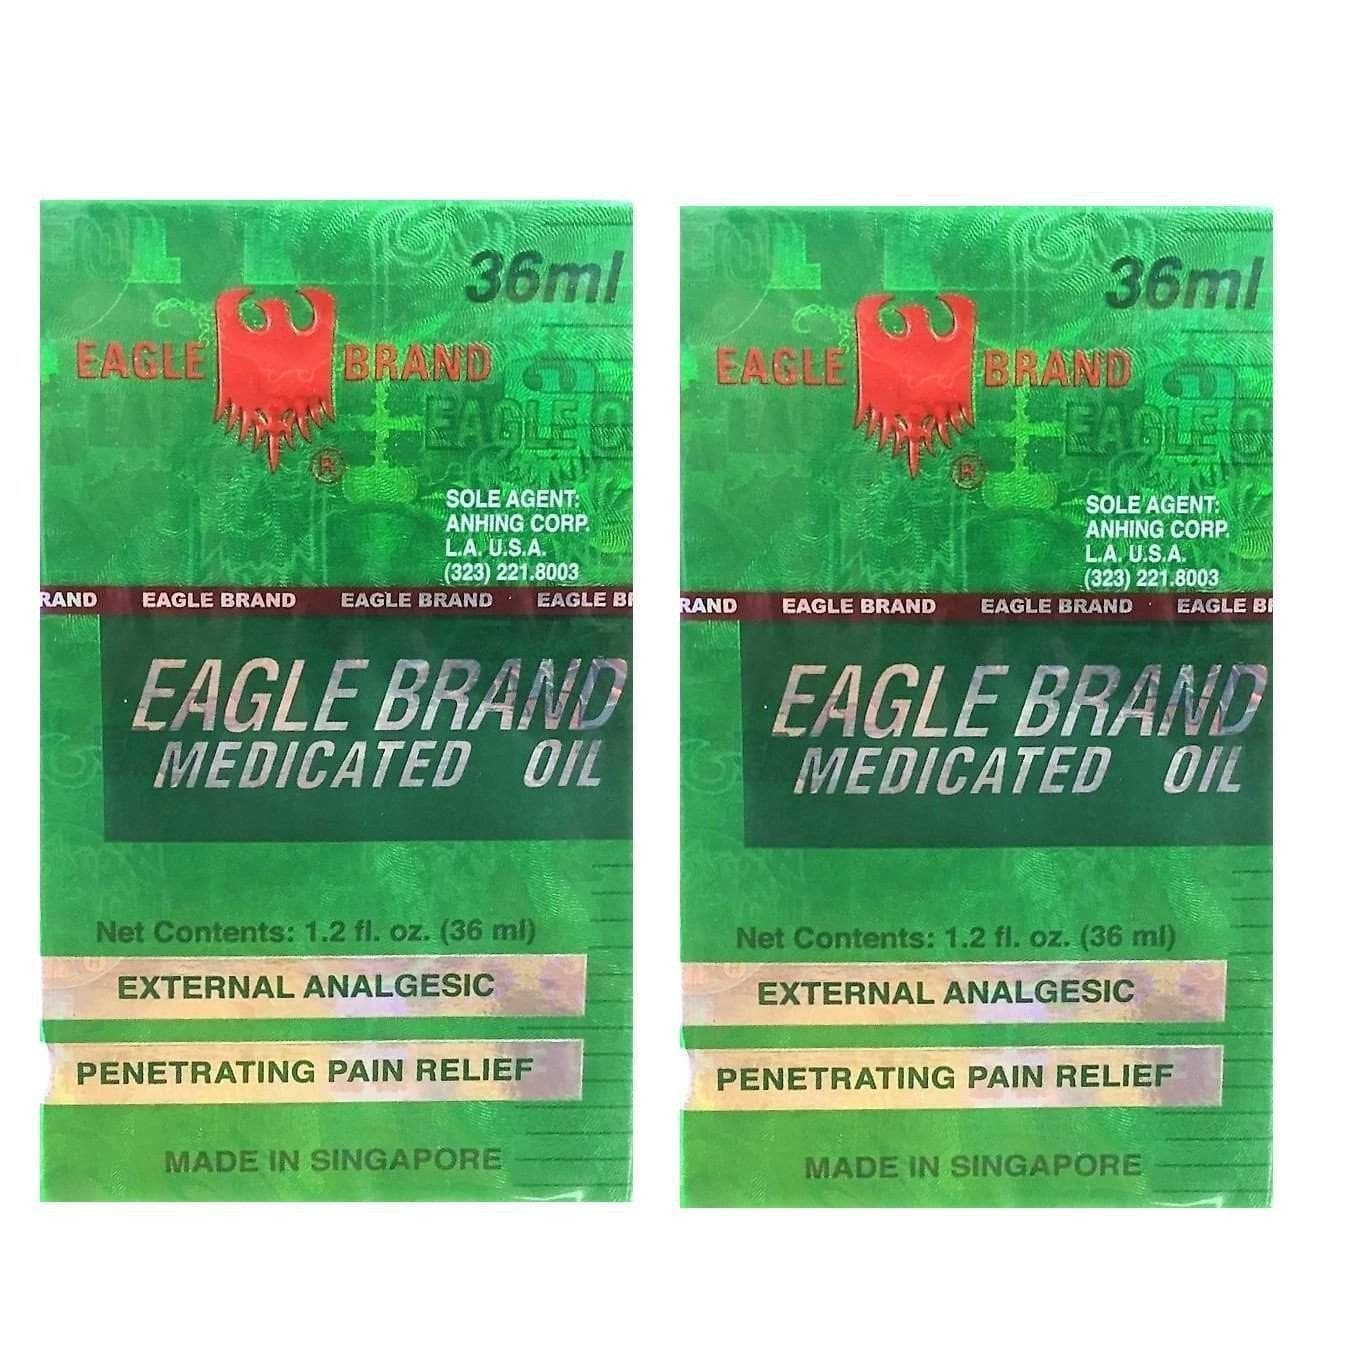 2 Bottles Eagle Brand Medicated Oil, Large Size (1.2oz/36ml) - Buy at New Green Nutrition